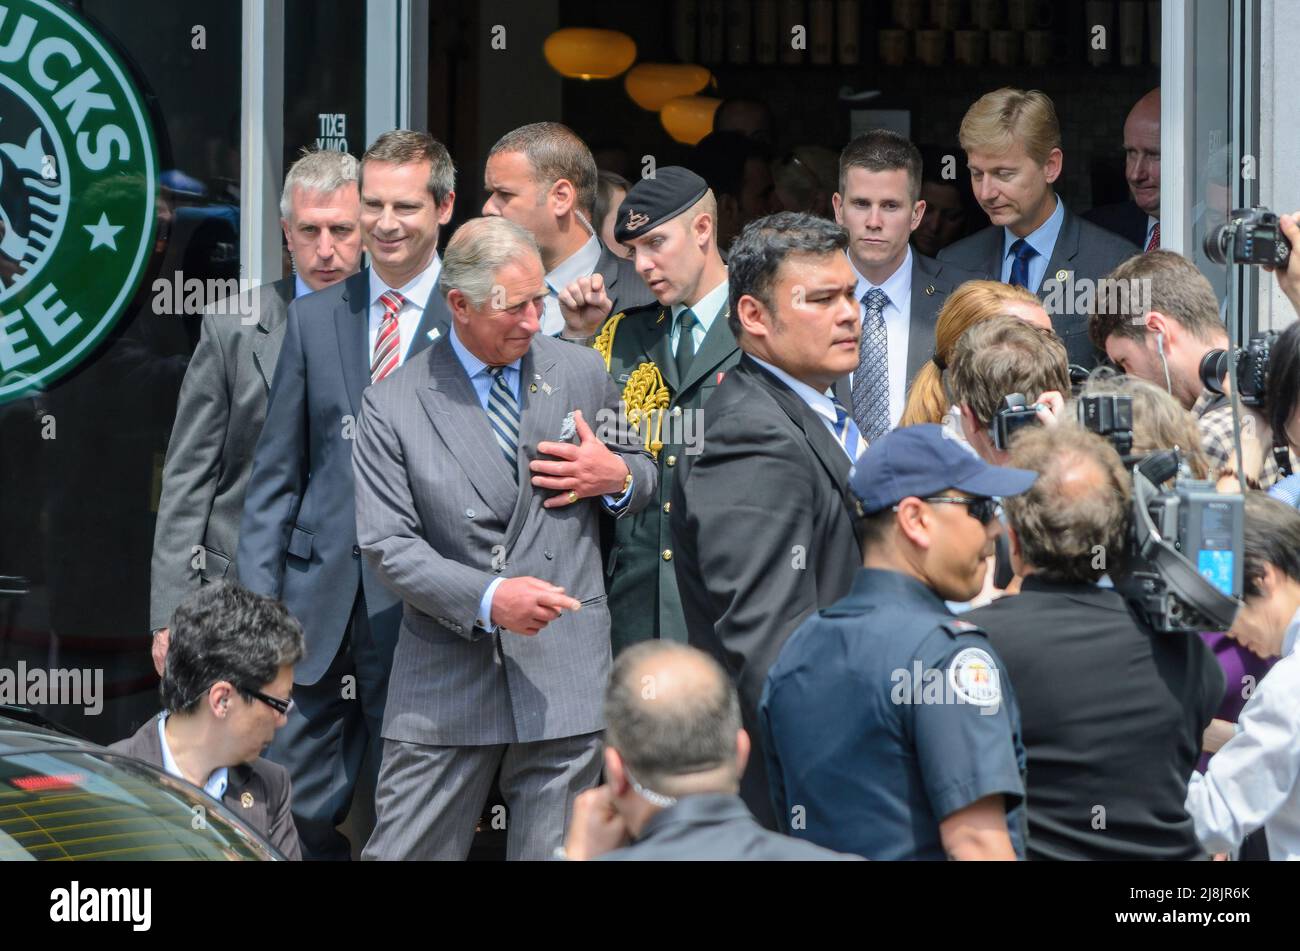 Toronto, Canada - May 22, 2012: Prince Charles visits Ryerson University. The visit was part of the Queen's Diamond Jubilee celebrations. Stock Photo